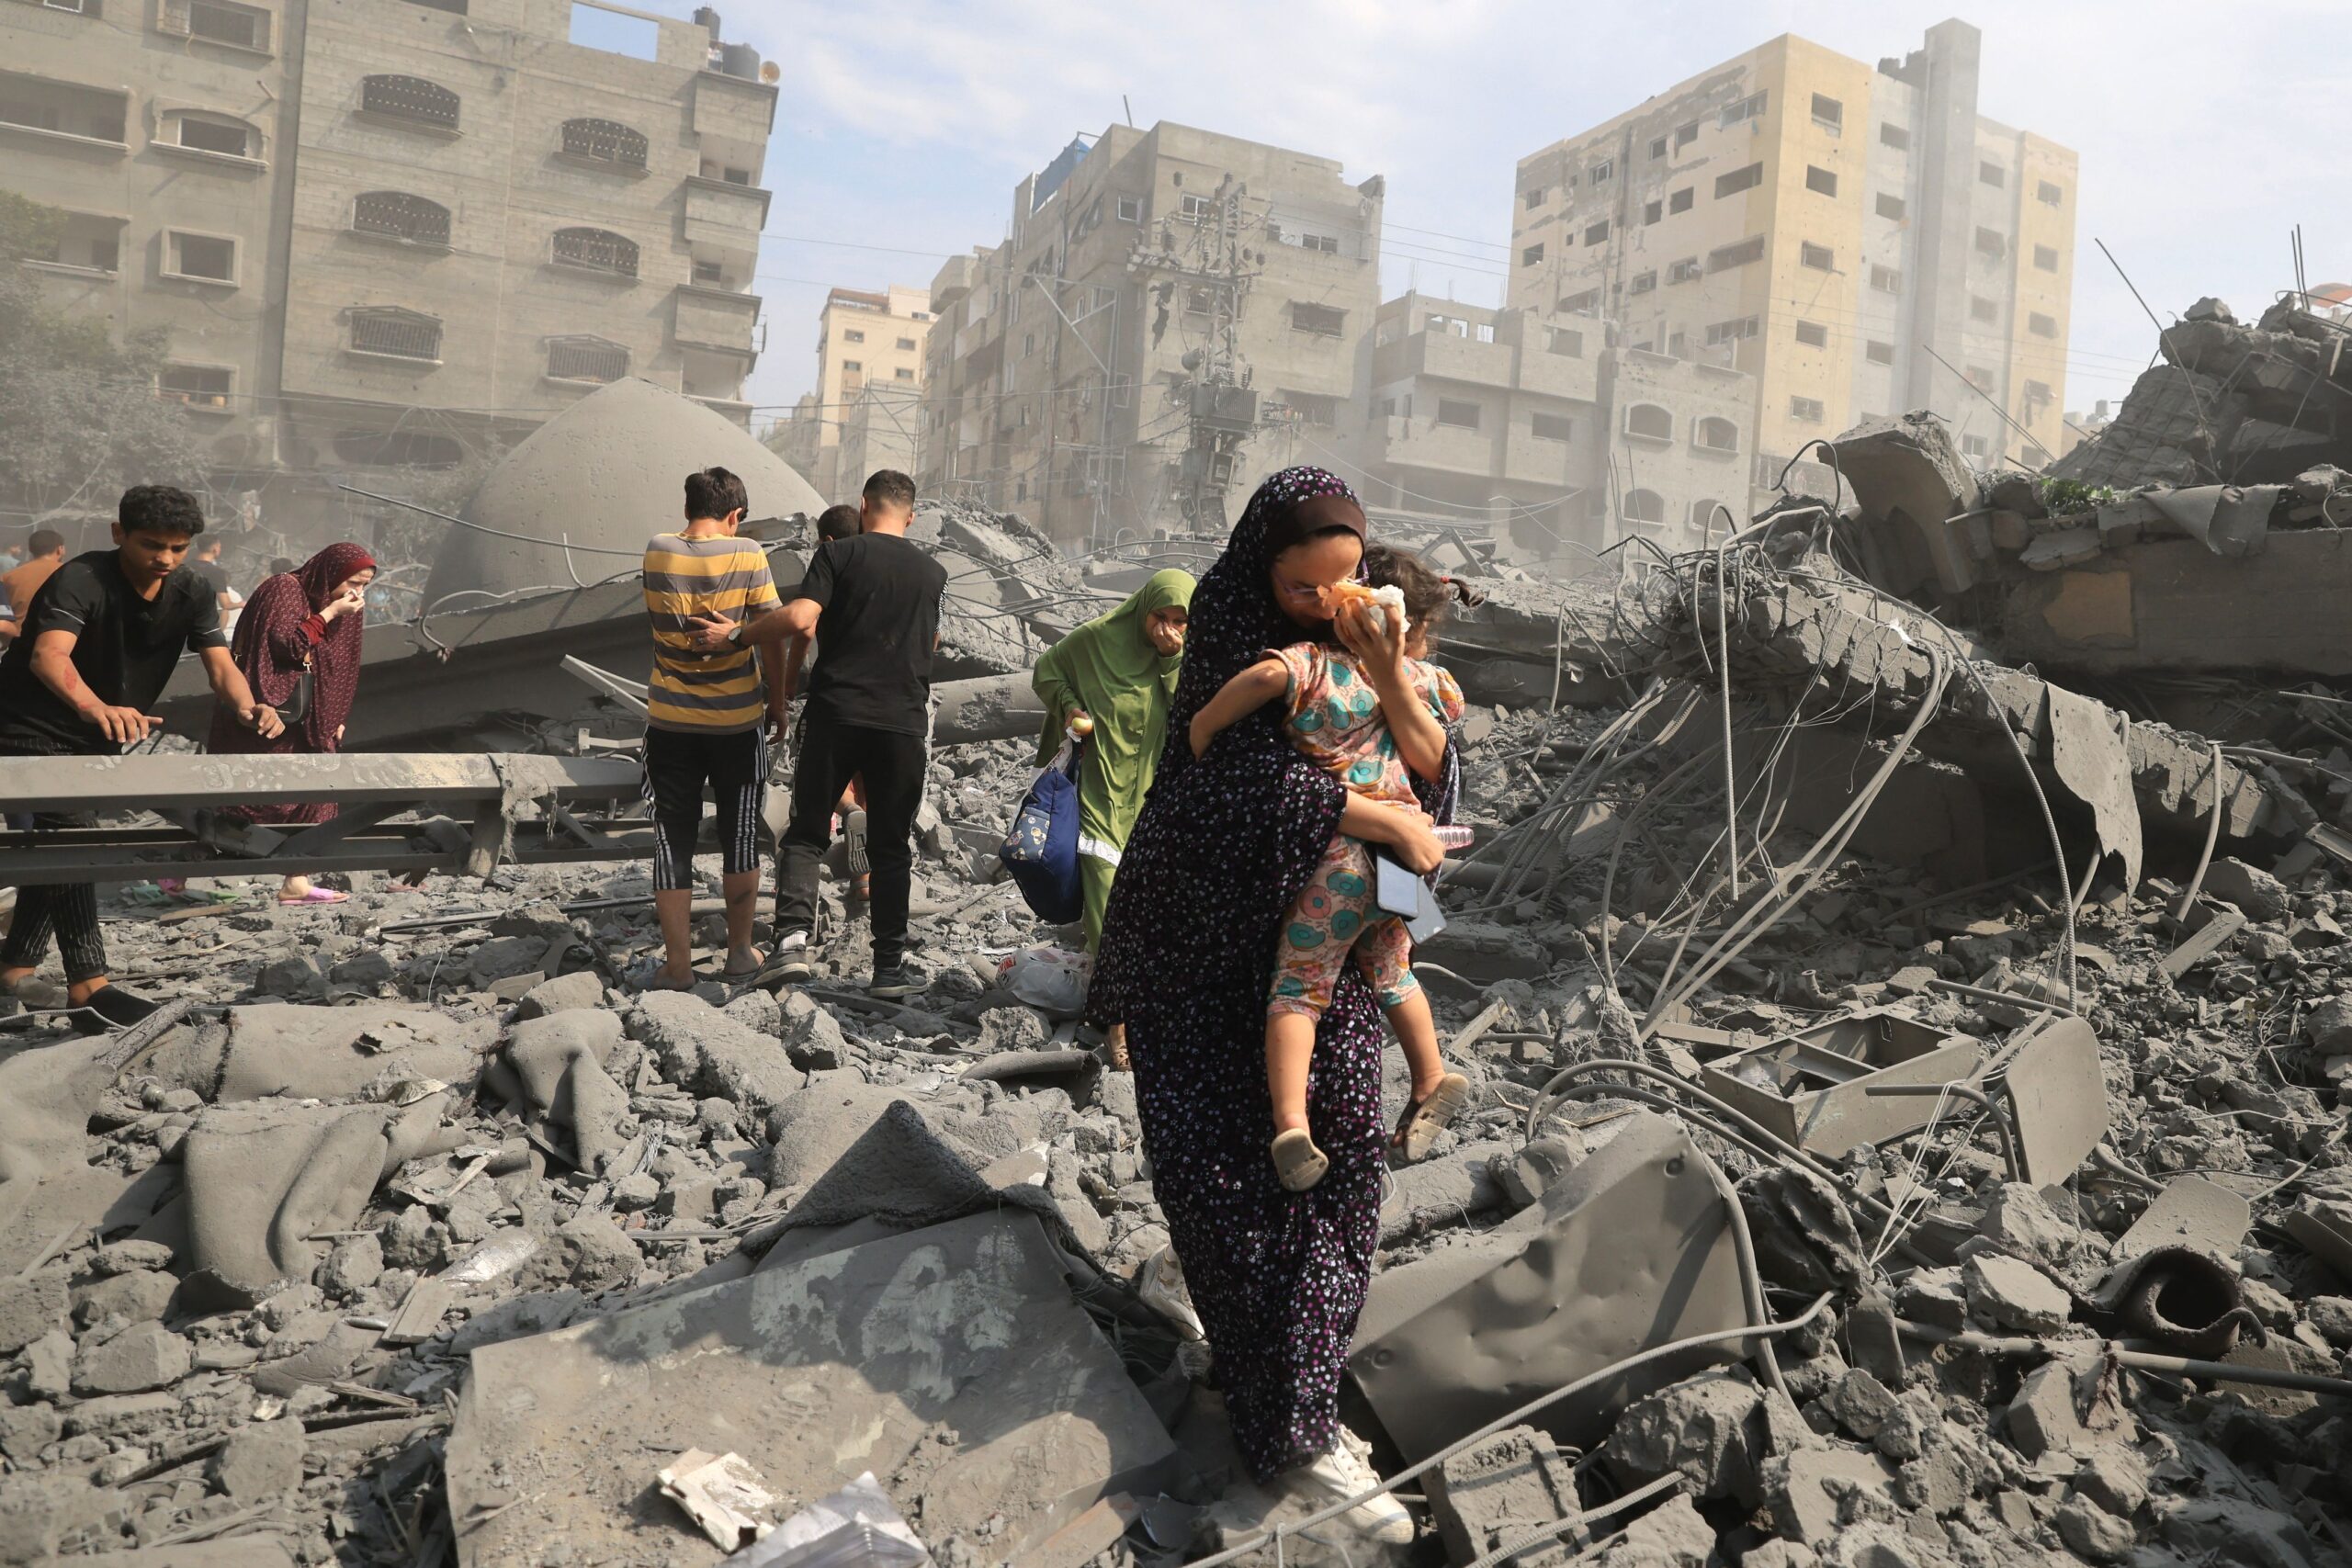 Demand a ceasefire by all parties in Israel and Gaza to end civilian suffering